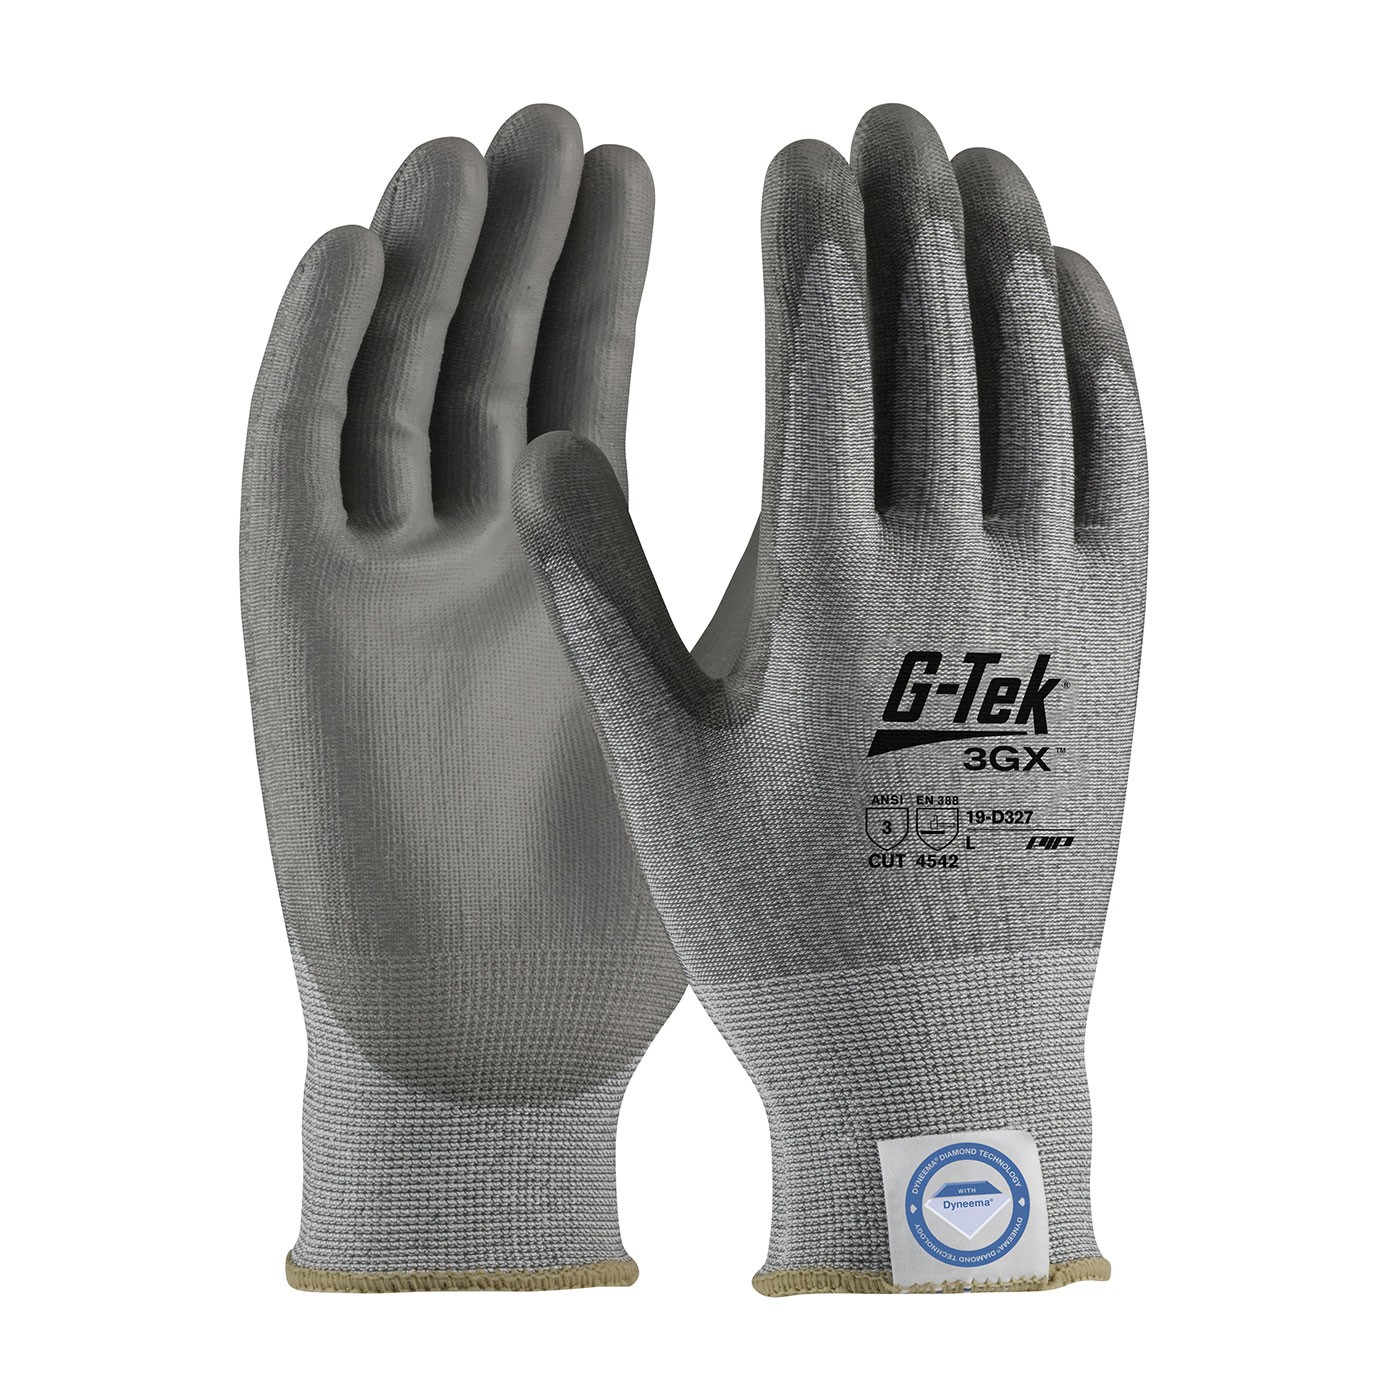 G-Tek® 3GX® Seamless Knit Dyneema® Diamond Blended Glove with Polyurethane Coated Smooth Grip on Palm & Fingers  (#19-D327)